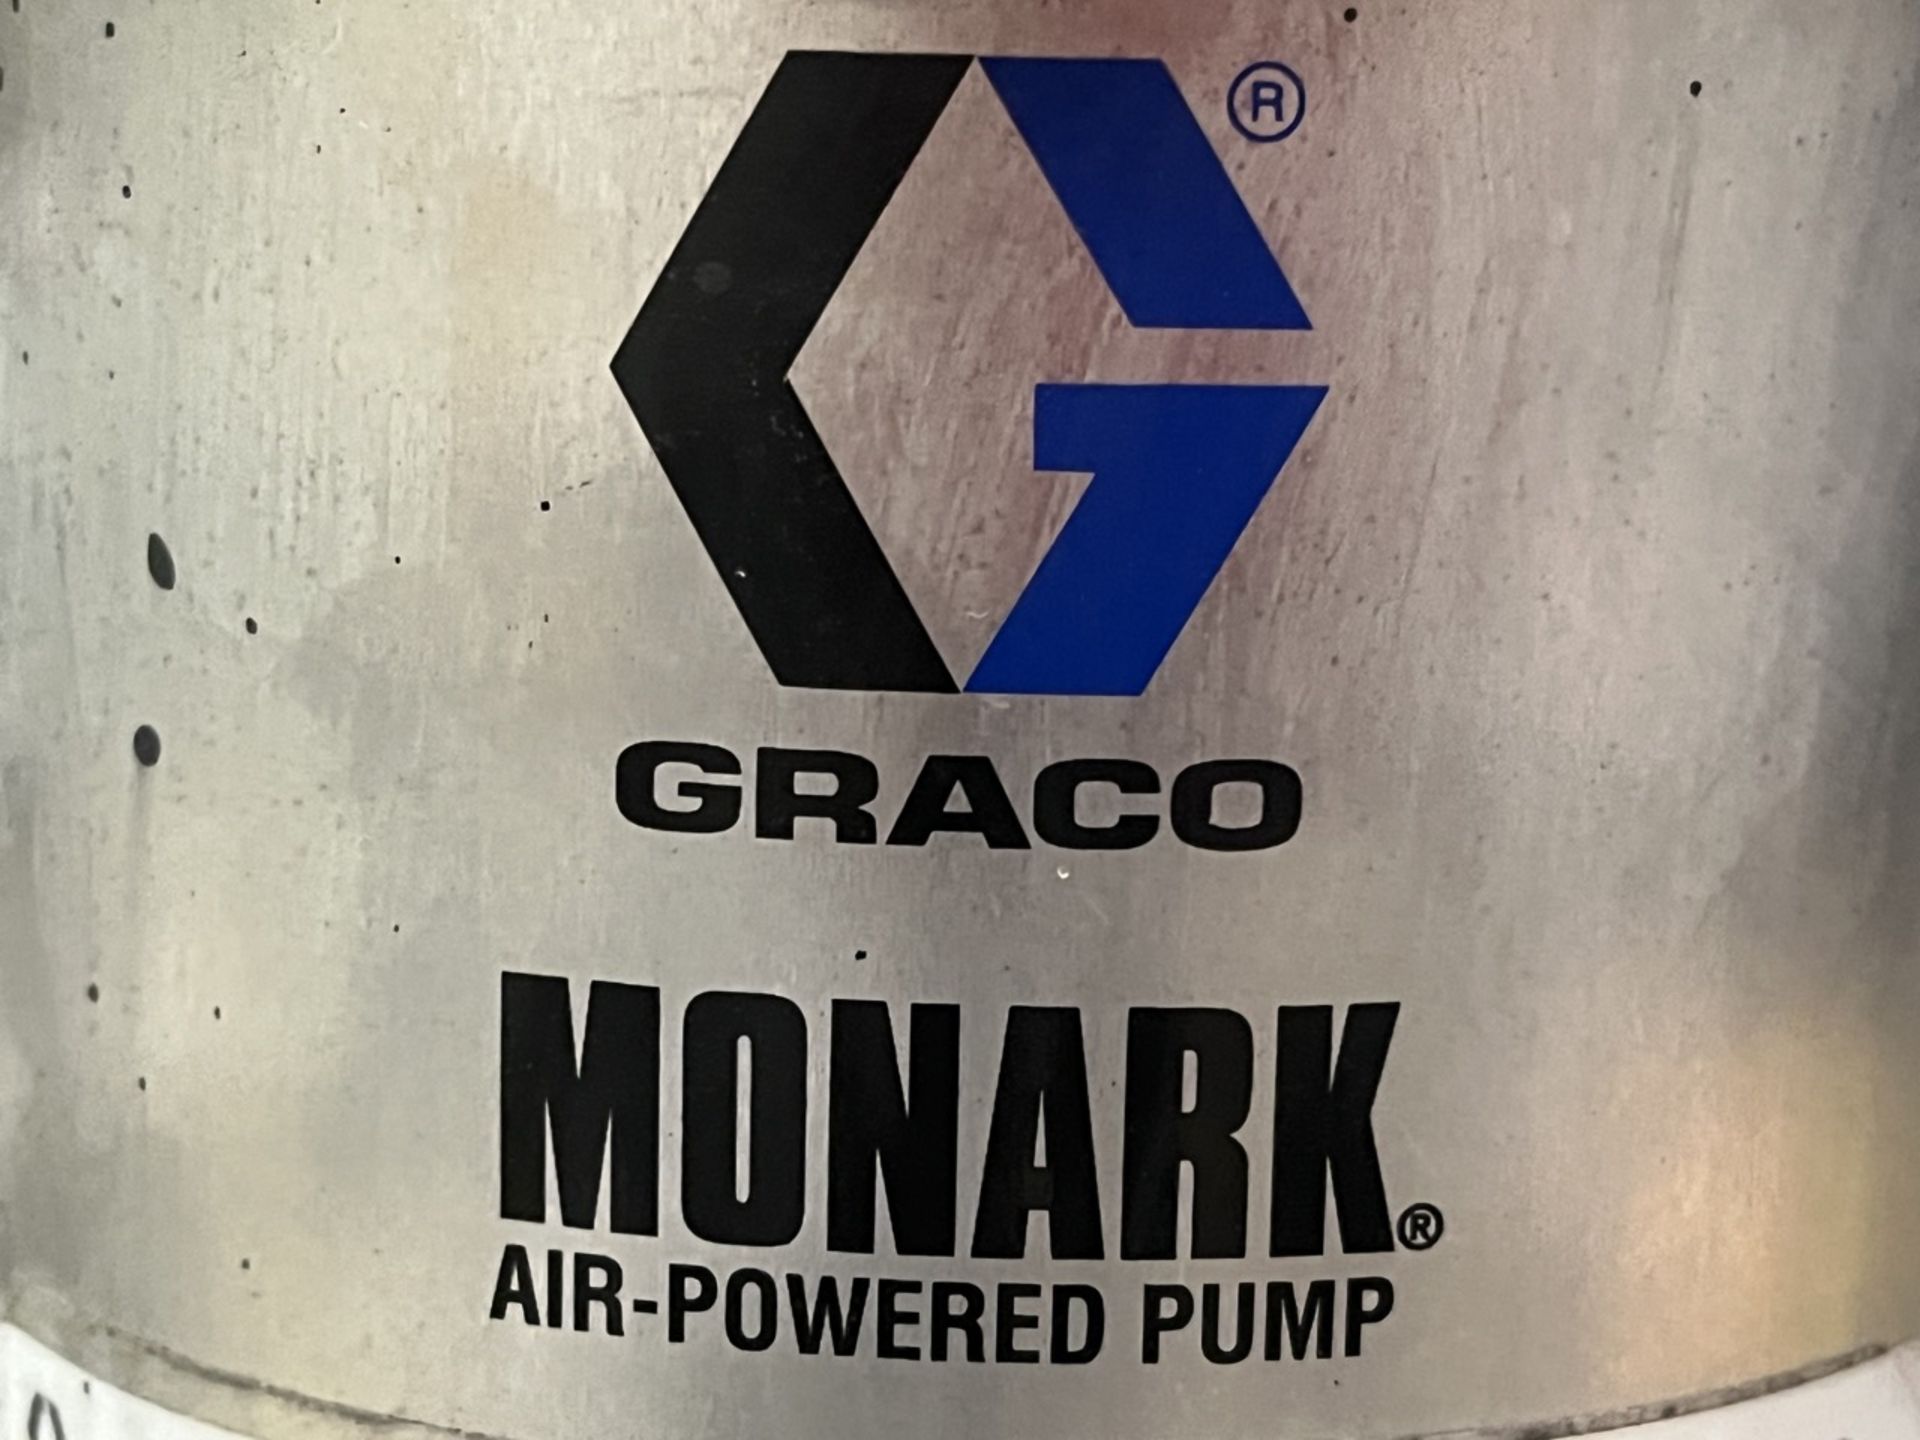 Monark Portable Pneumatic Paint Station, Serial No. A006148, Equipped with Graco high pressure pump - Image 8 of 11